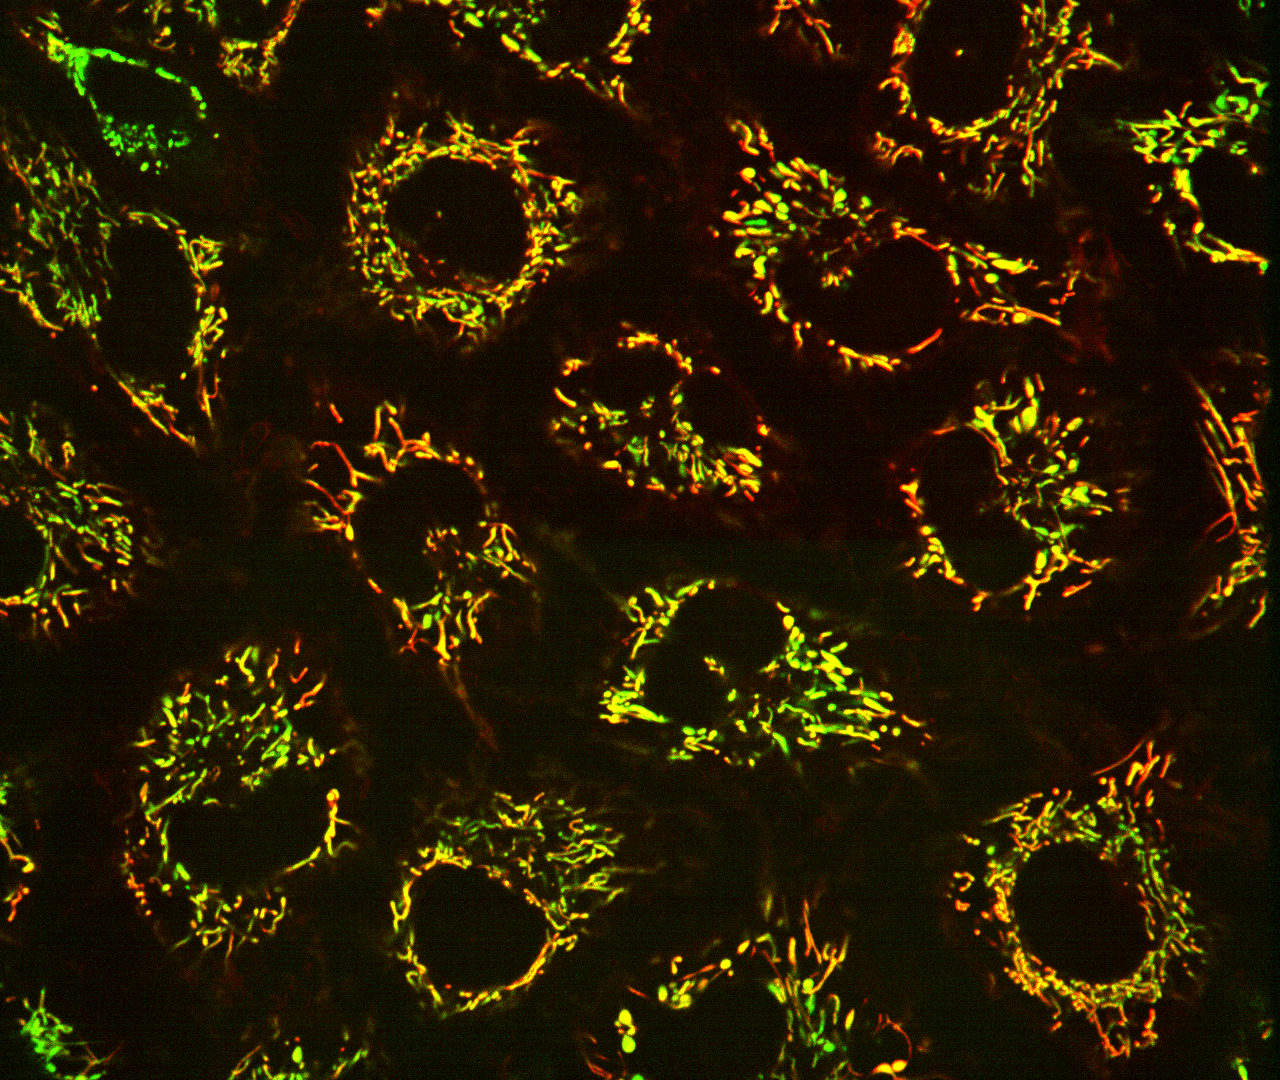 Fluorescent biosensors localized to the mitochondria of human cells. 